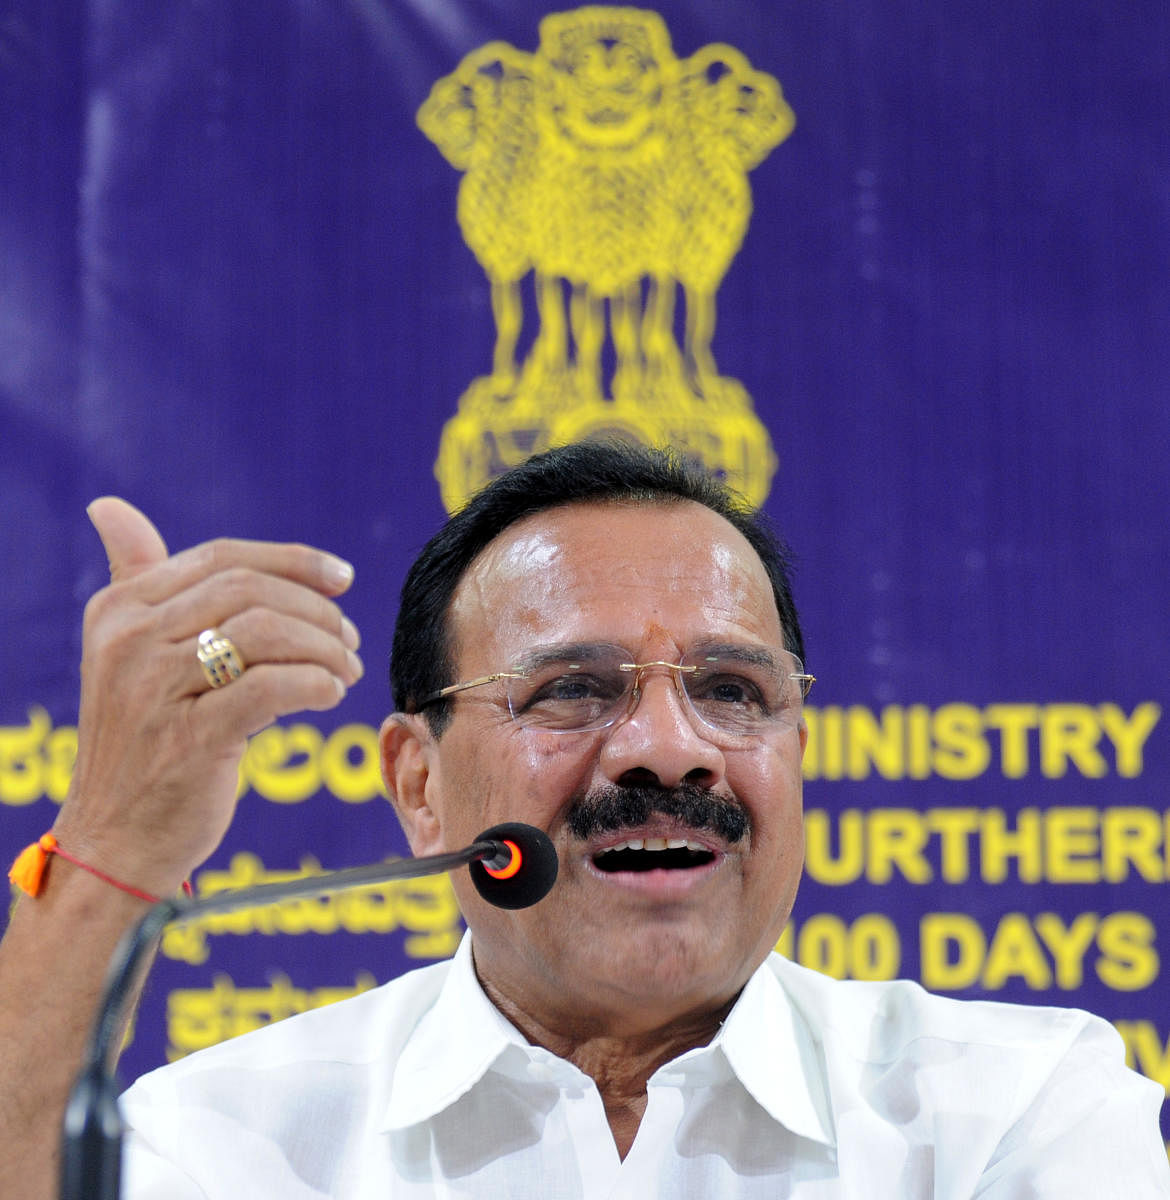 Union minister of Chemicals and Fertilizers D V Sadananda Gowda 